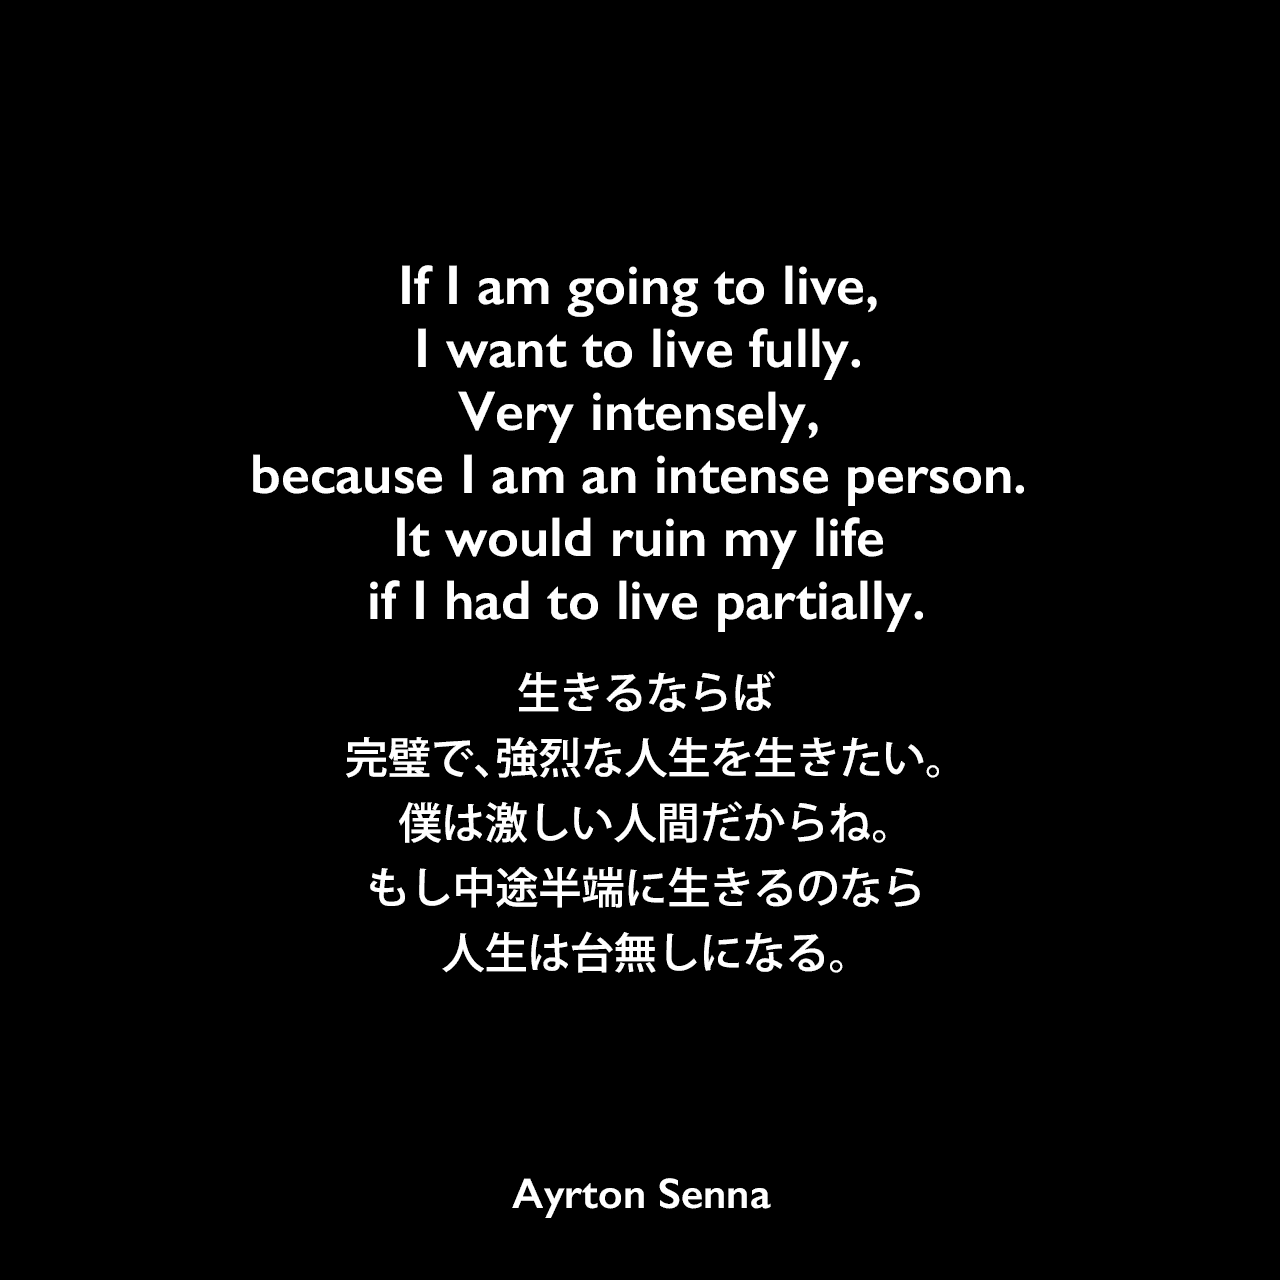 If I am going to live, I want to live fully. Very intensely, because I am an intense person. It would ruin my life if I had to live partially.生きるならば、完璧で、強烈な人生を生きたい。僕は激しい人間だからね。もし中途半端に生きるのなら人生は台無しになる。Ayrton Senna